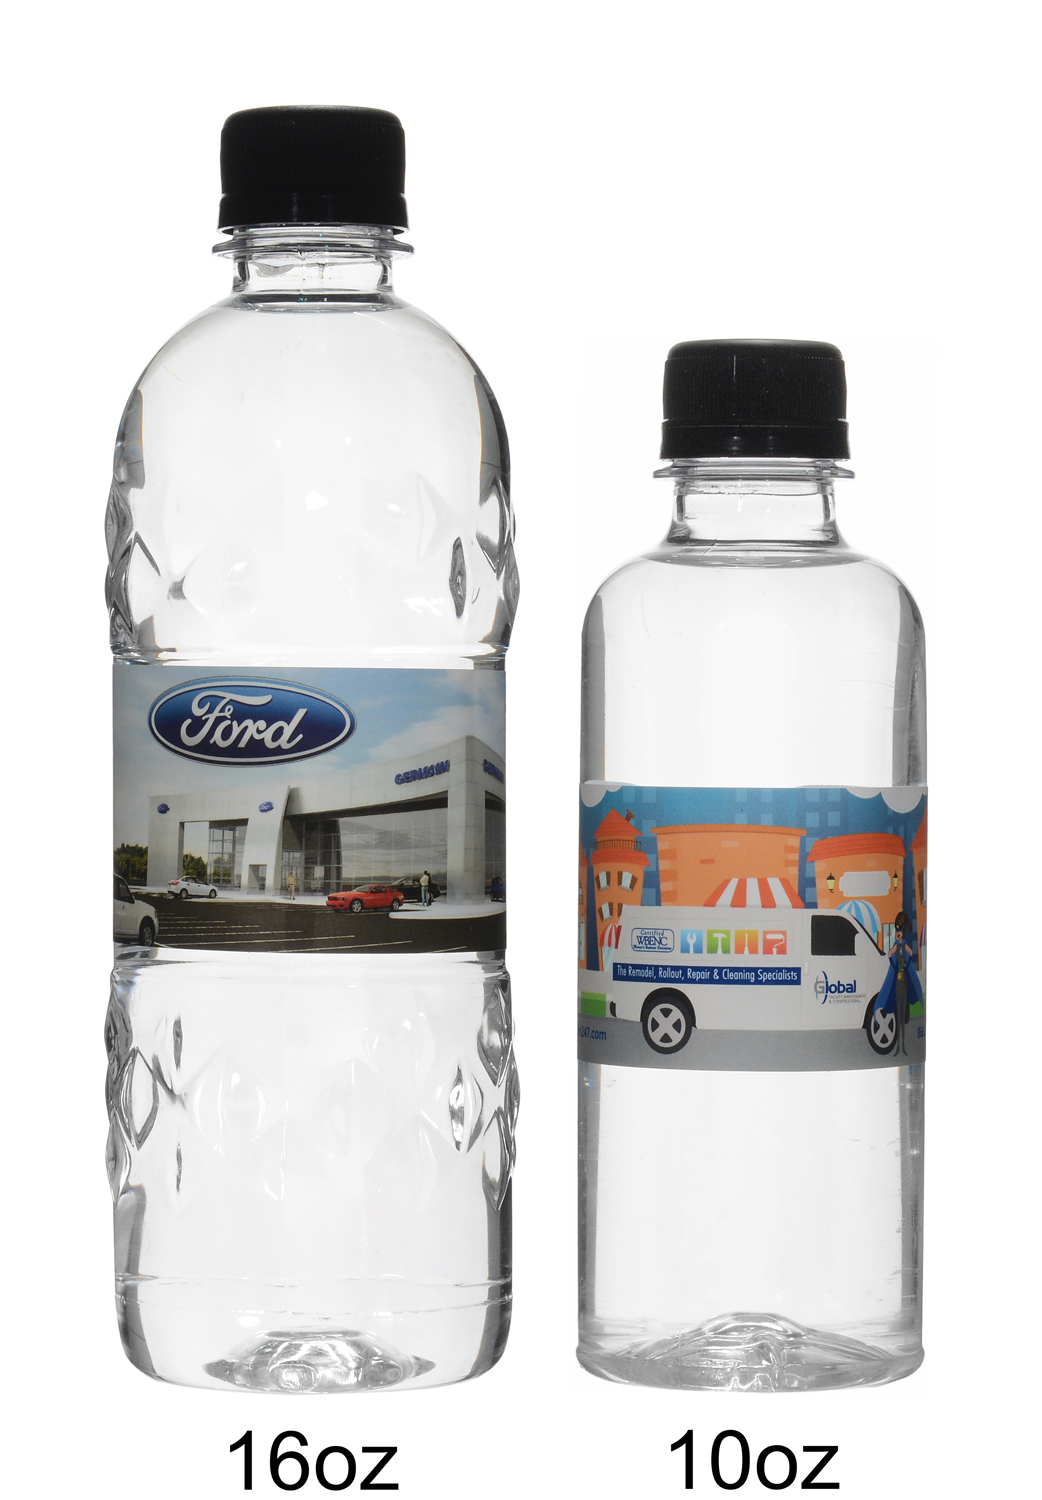 Custom water bottles produced and shipped from Canada.